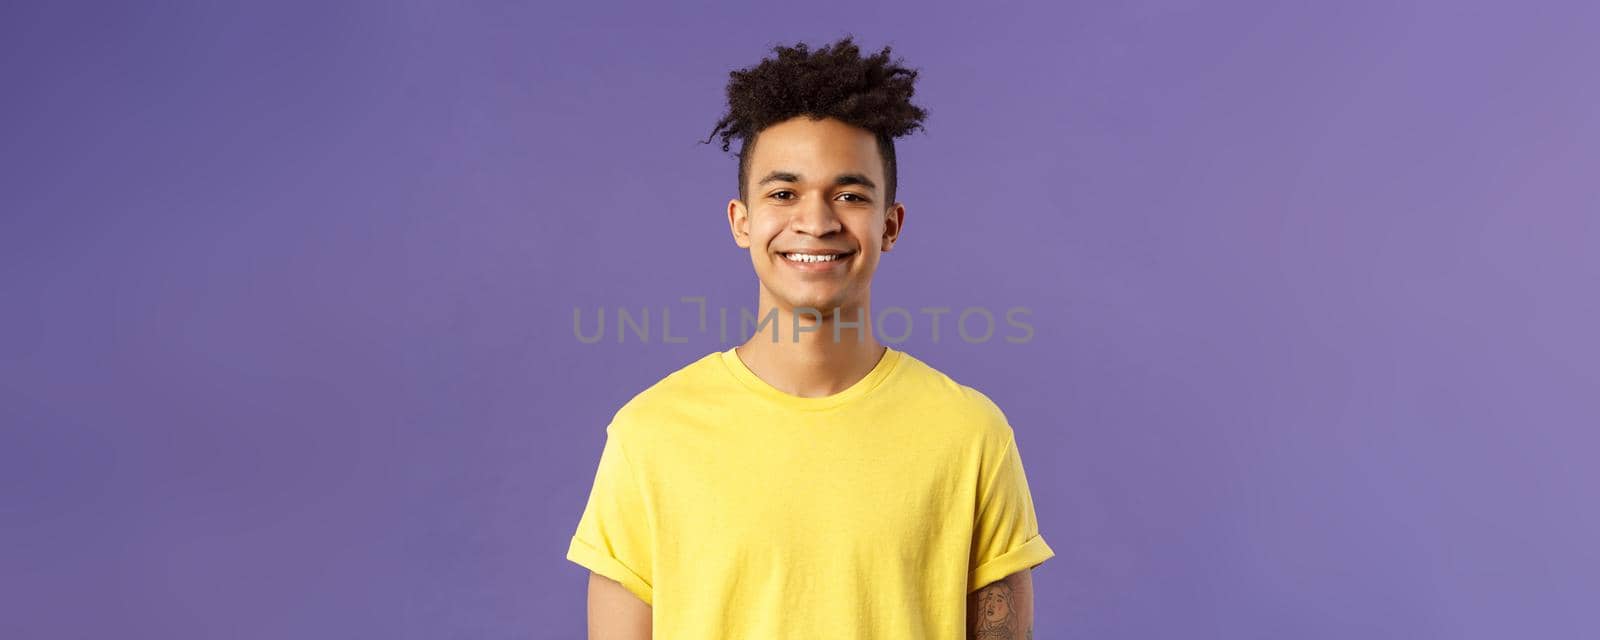 Close-up portrait of nice, friendly-looking hispanic male student in yellow t-shirt, grinning delighted, look upbeat happy and positive, standing enthusiastic with beaming smile purple background by Benzoix